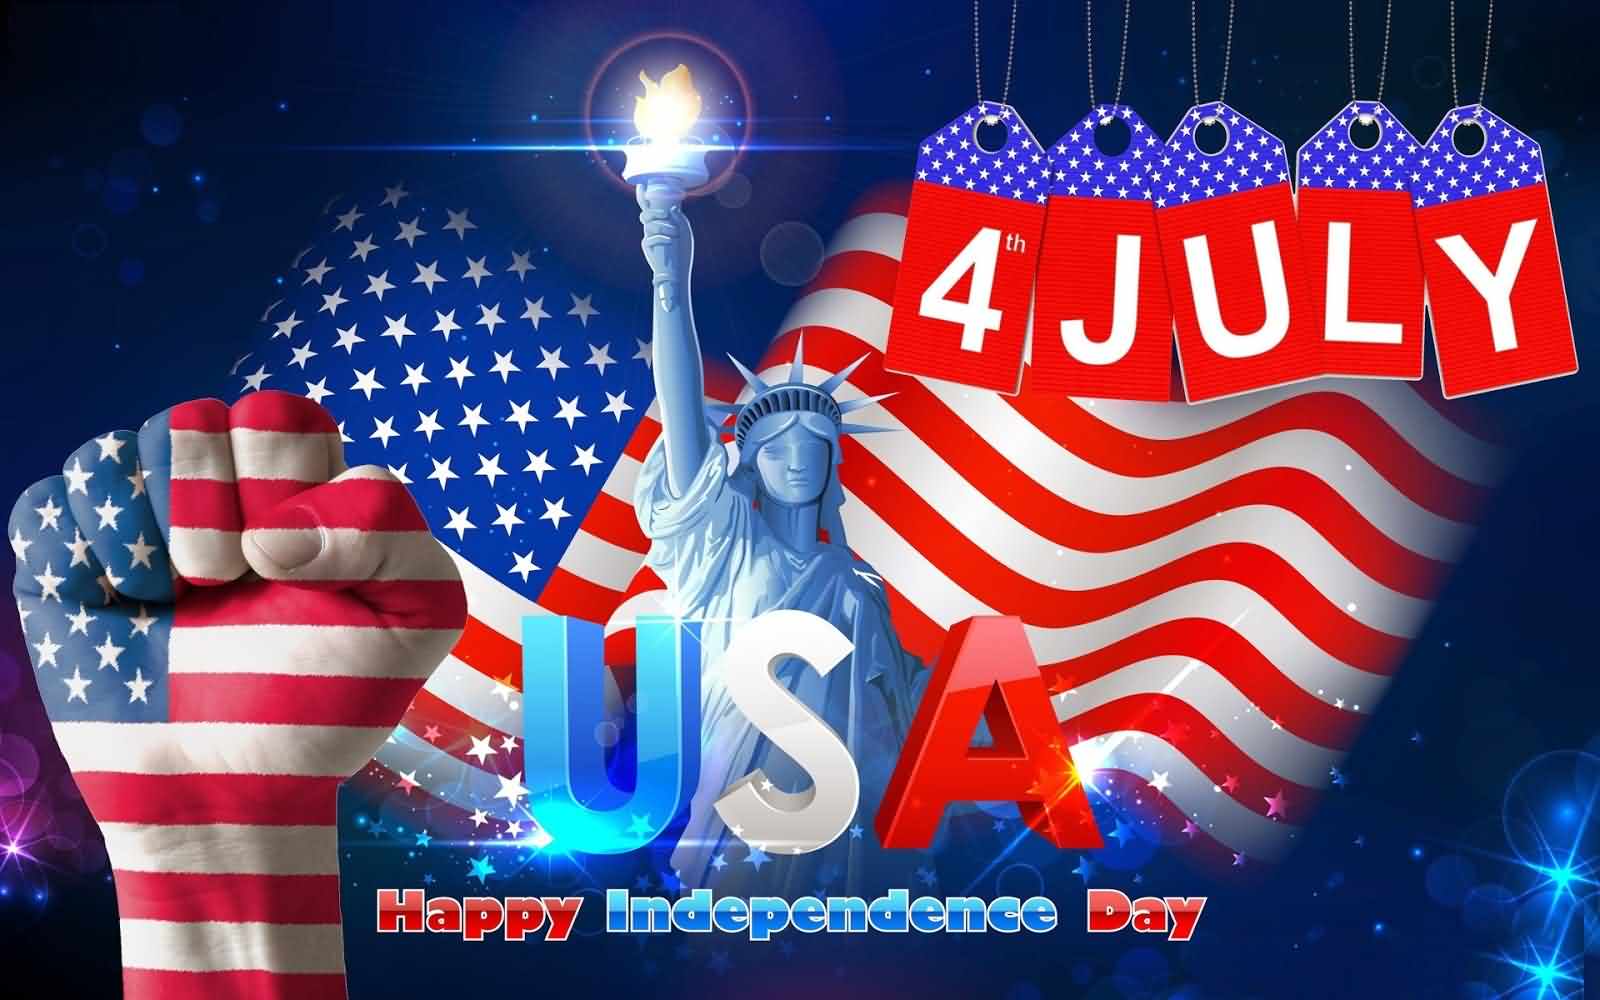 Happy Independence Day 4 July Wishes Wallpaper